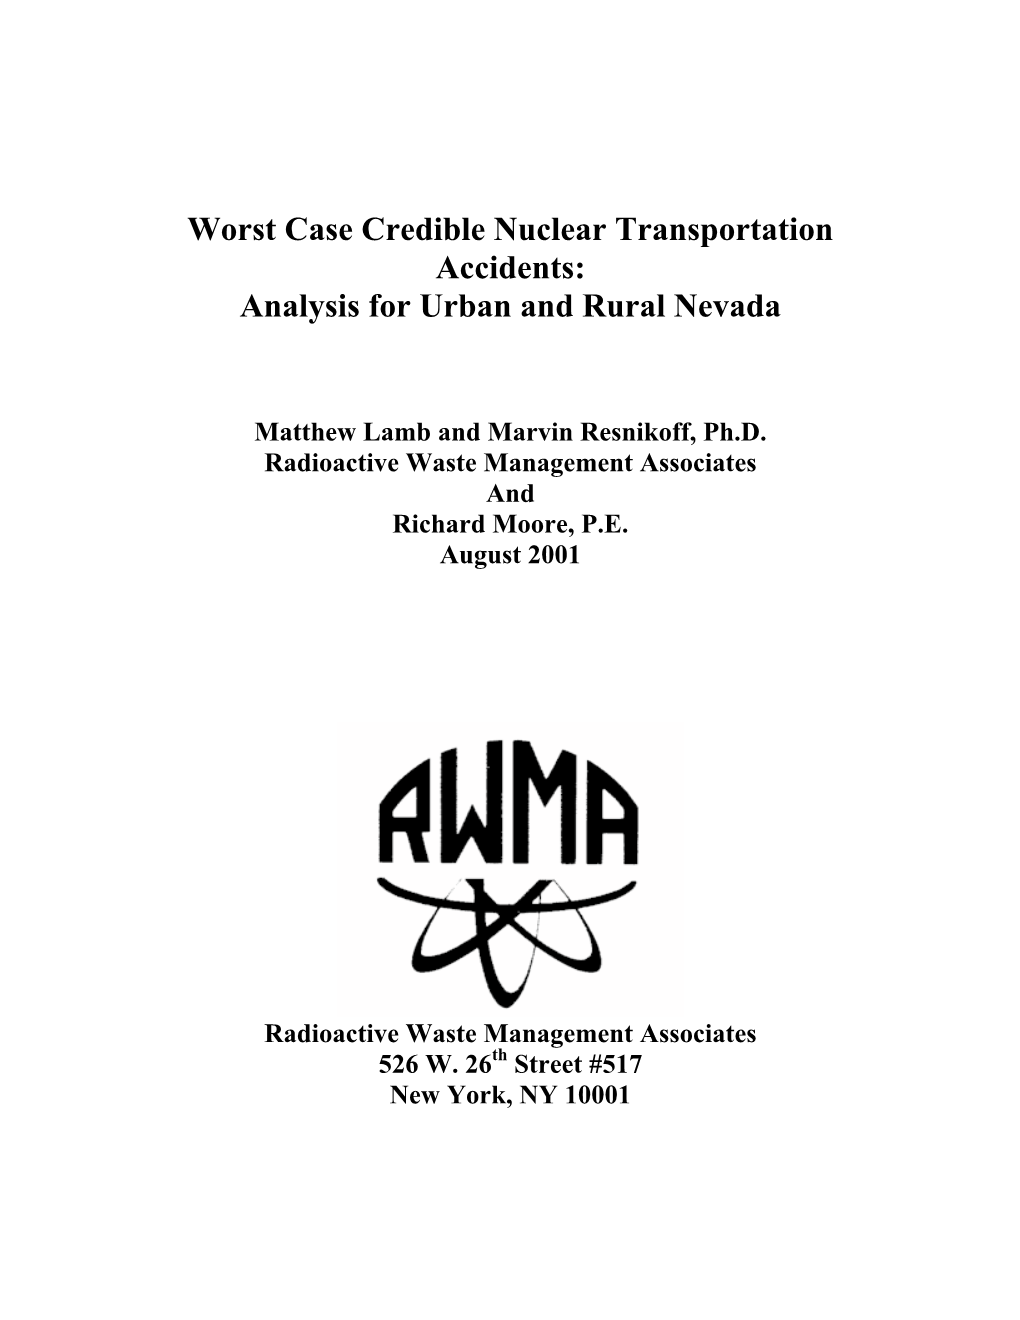 Worst Case Credible Nuclear Transportation Accidents: Analysis for Urban and Rural Nevada